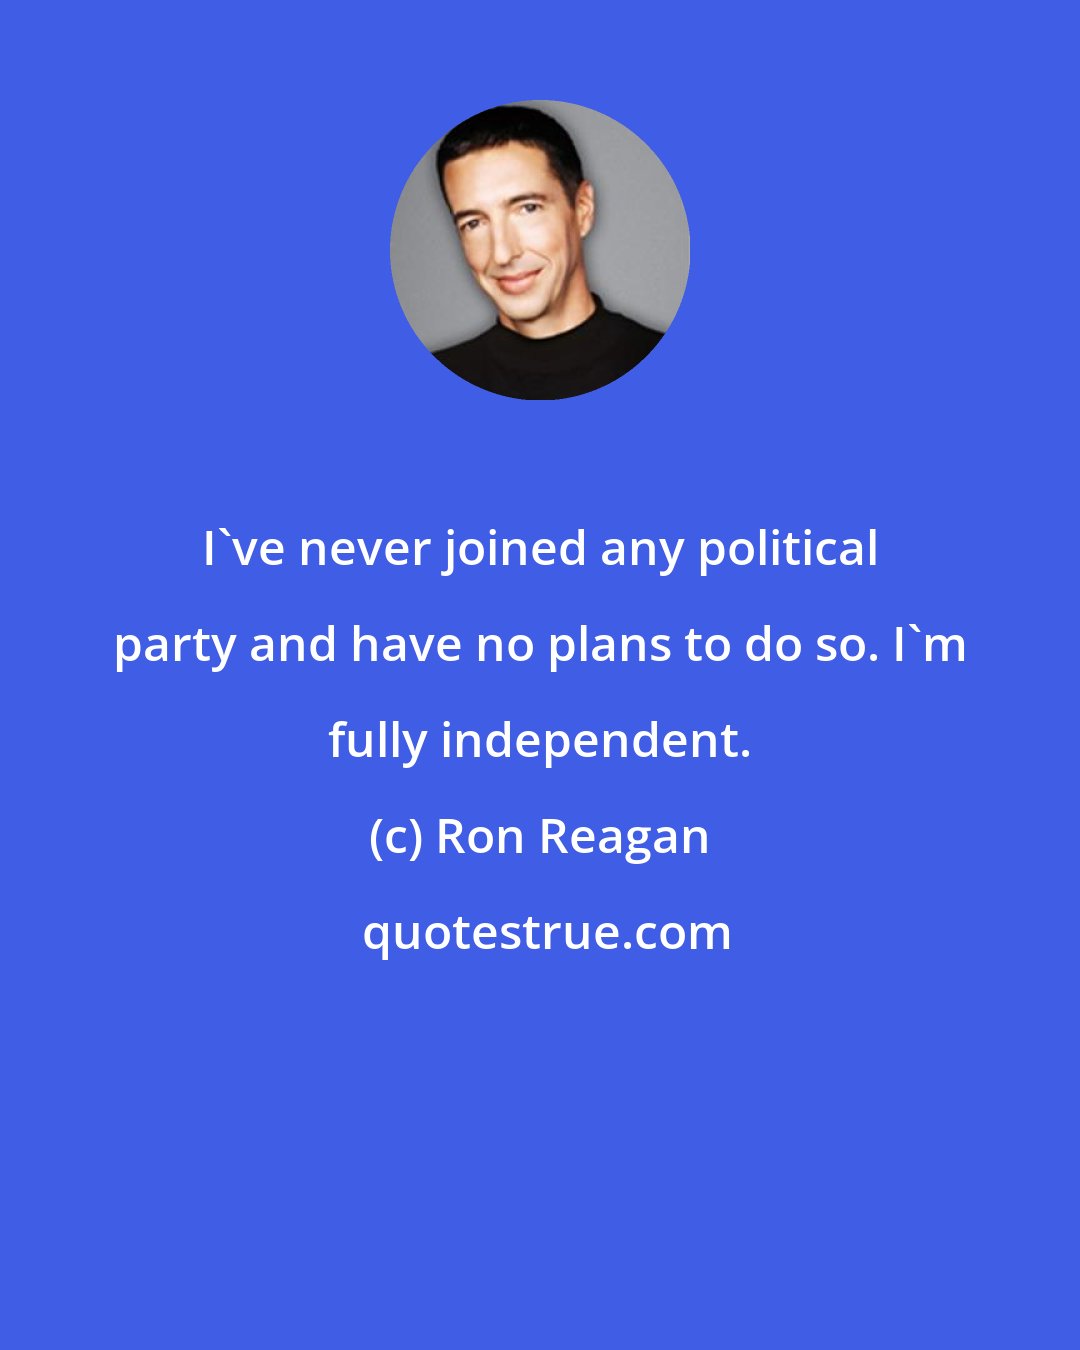 Ron Reagan: I've never joined any political party and have no plans to do so. I'm fully independent.